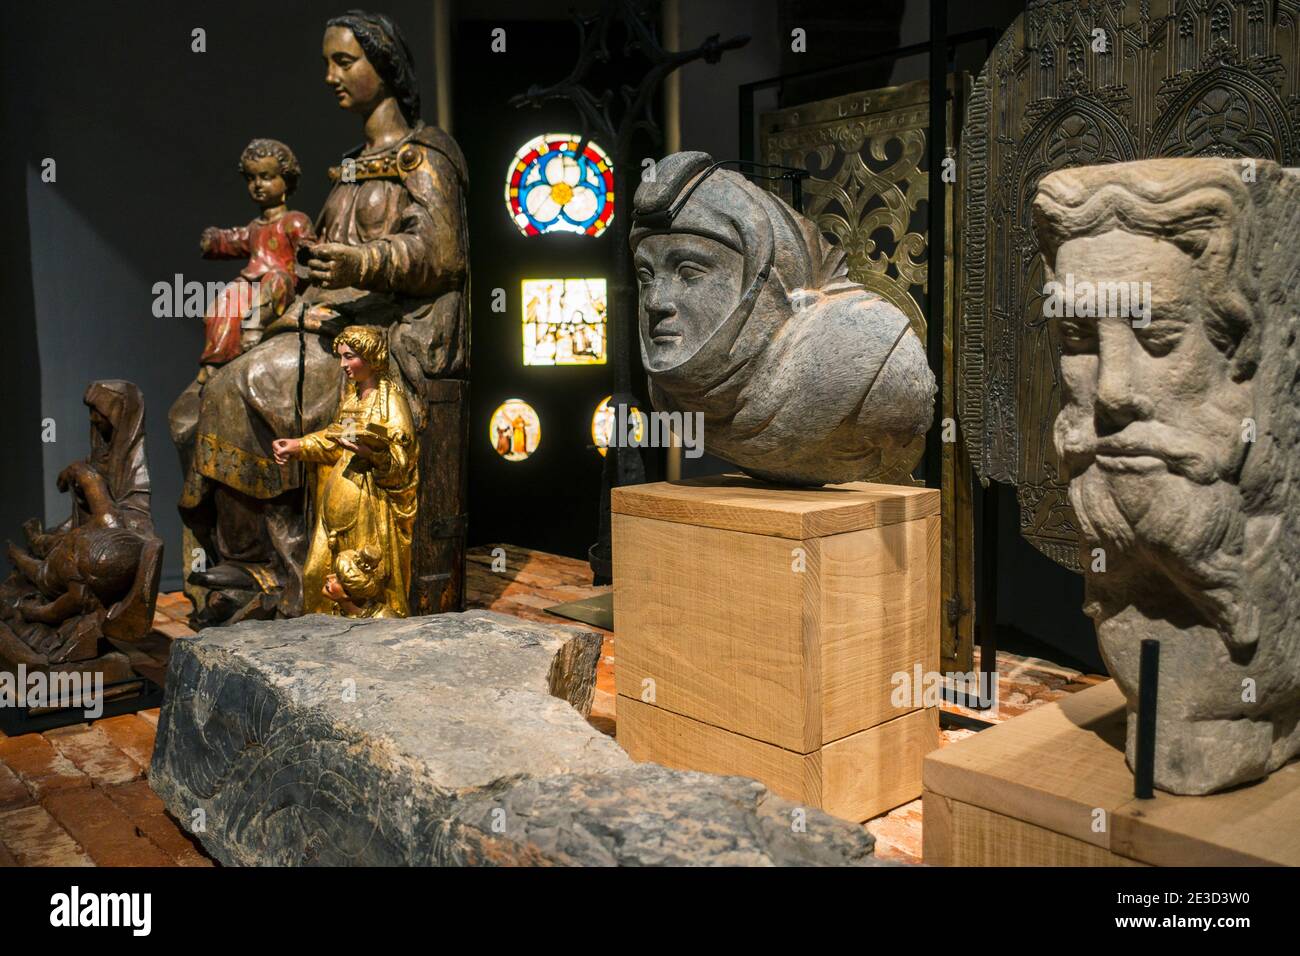 Medieval religious art, statues and sculptures at STAM, Ghent City Museum / Stadsmuseum Gent, East Flanders, Belgium Stock Photo